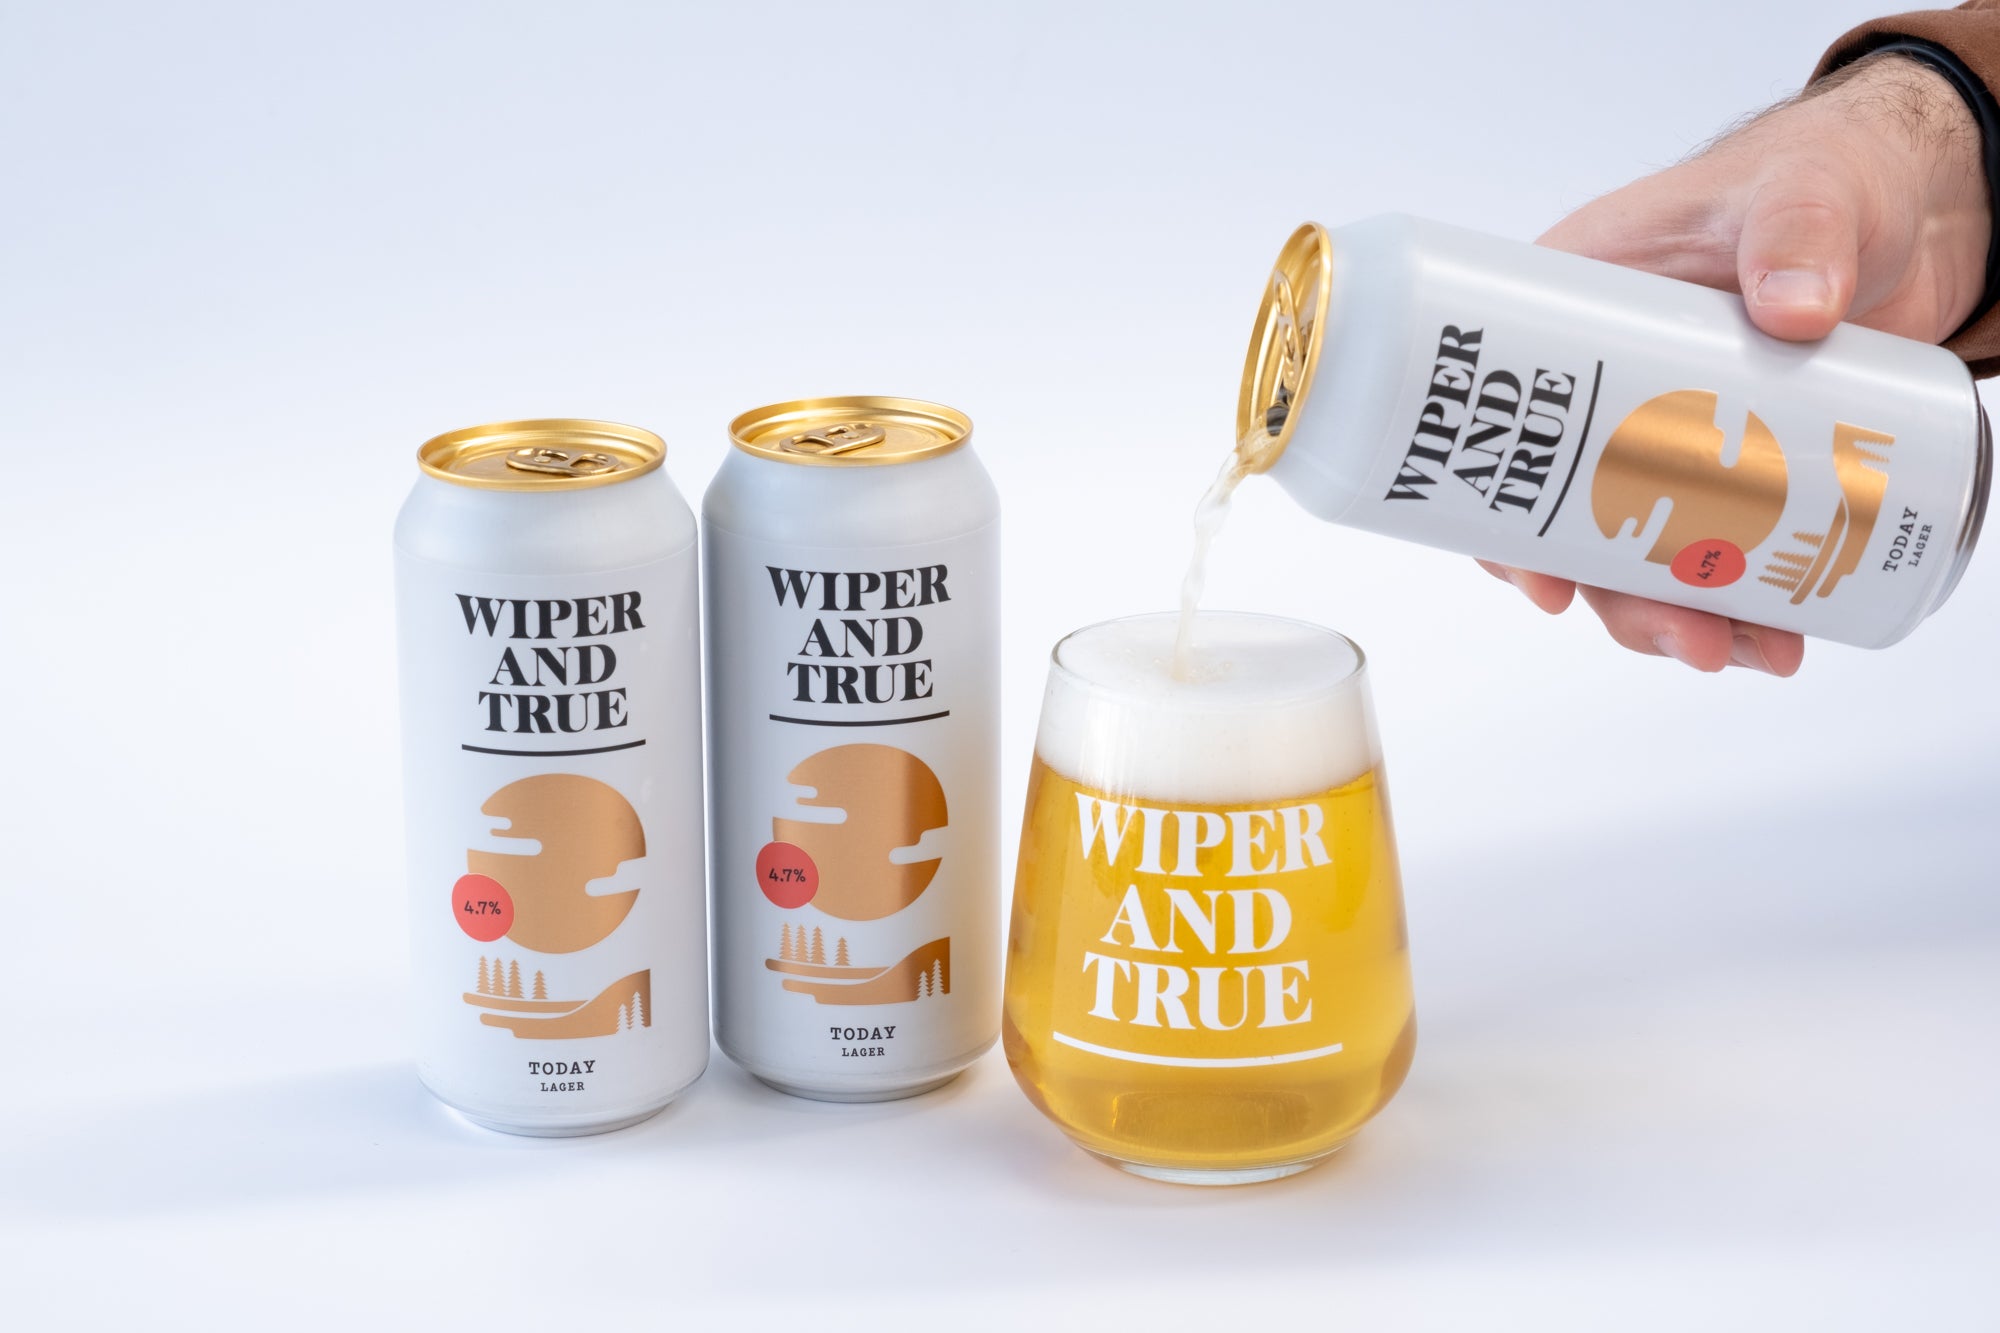 Two Wiper and True cans against a white background. A third can is being poured into a glass